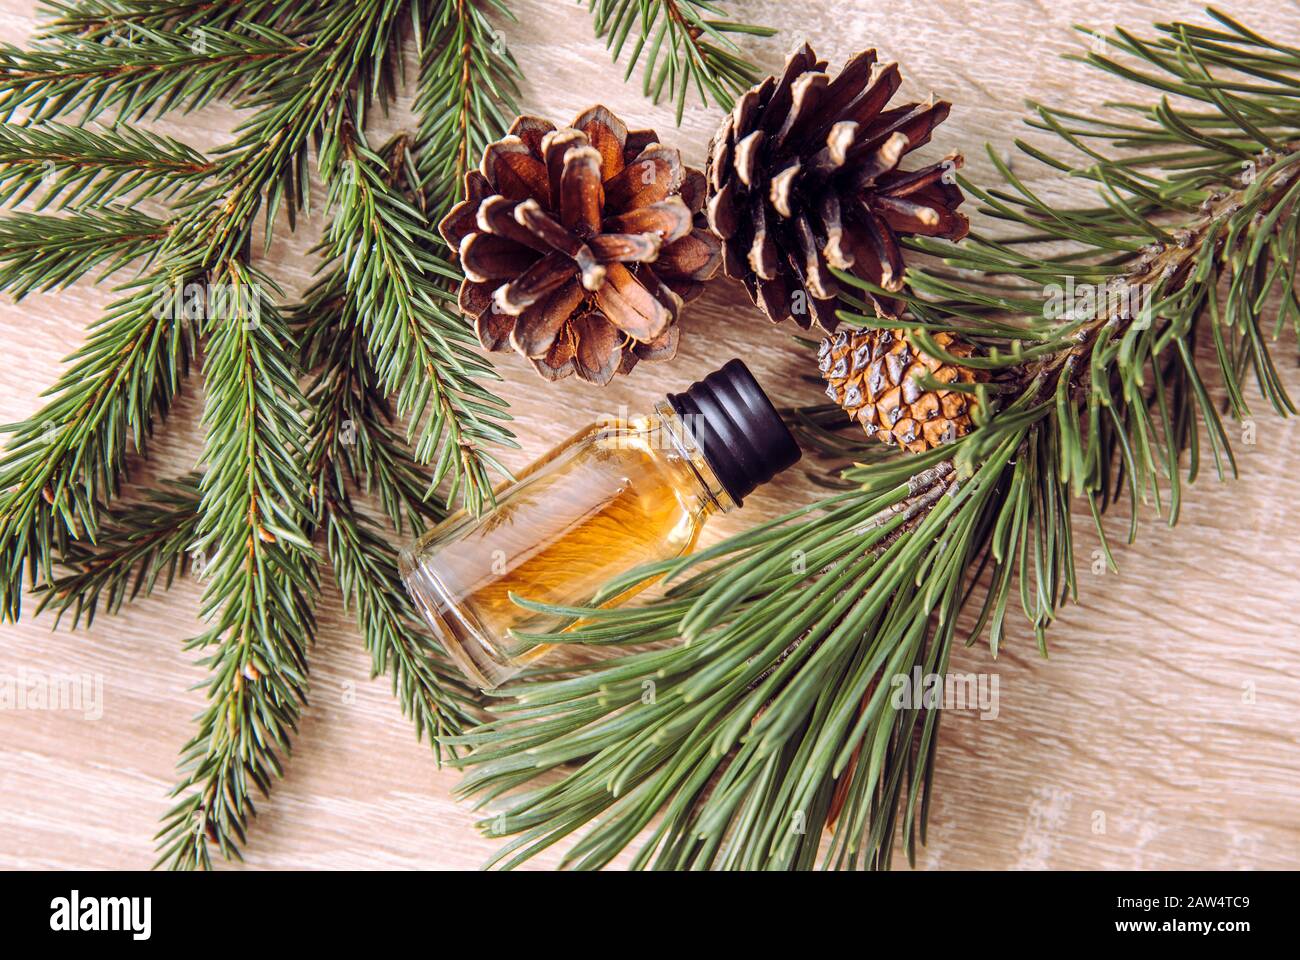 Pine and fir tree aroma oil bottle with pine tree and fir tree branches for decoration on lights wooden background. Essential oil concept. Stock Photo